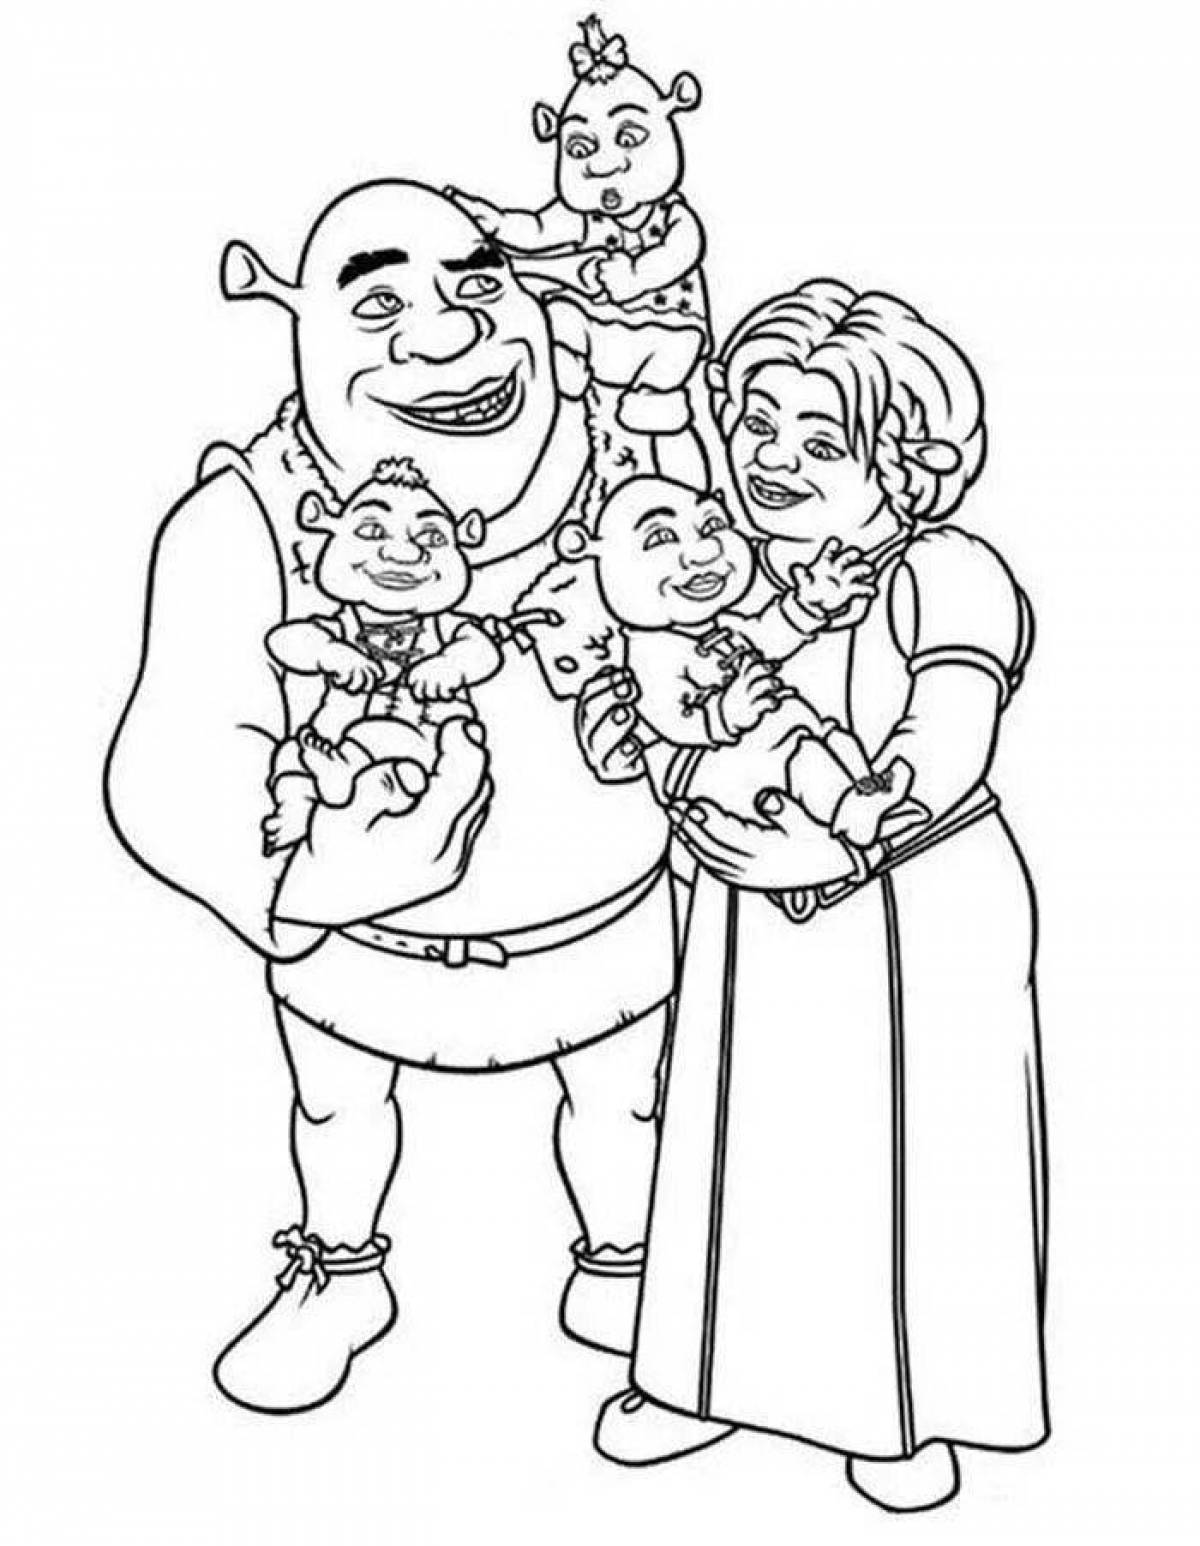 Peace coloring shrek and fiona